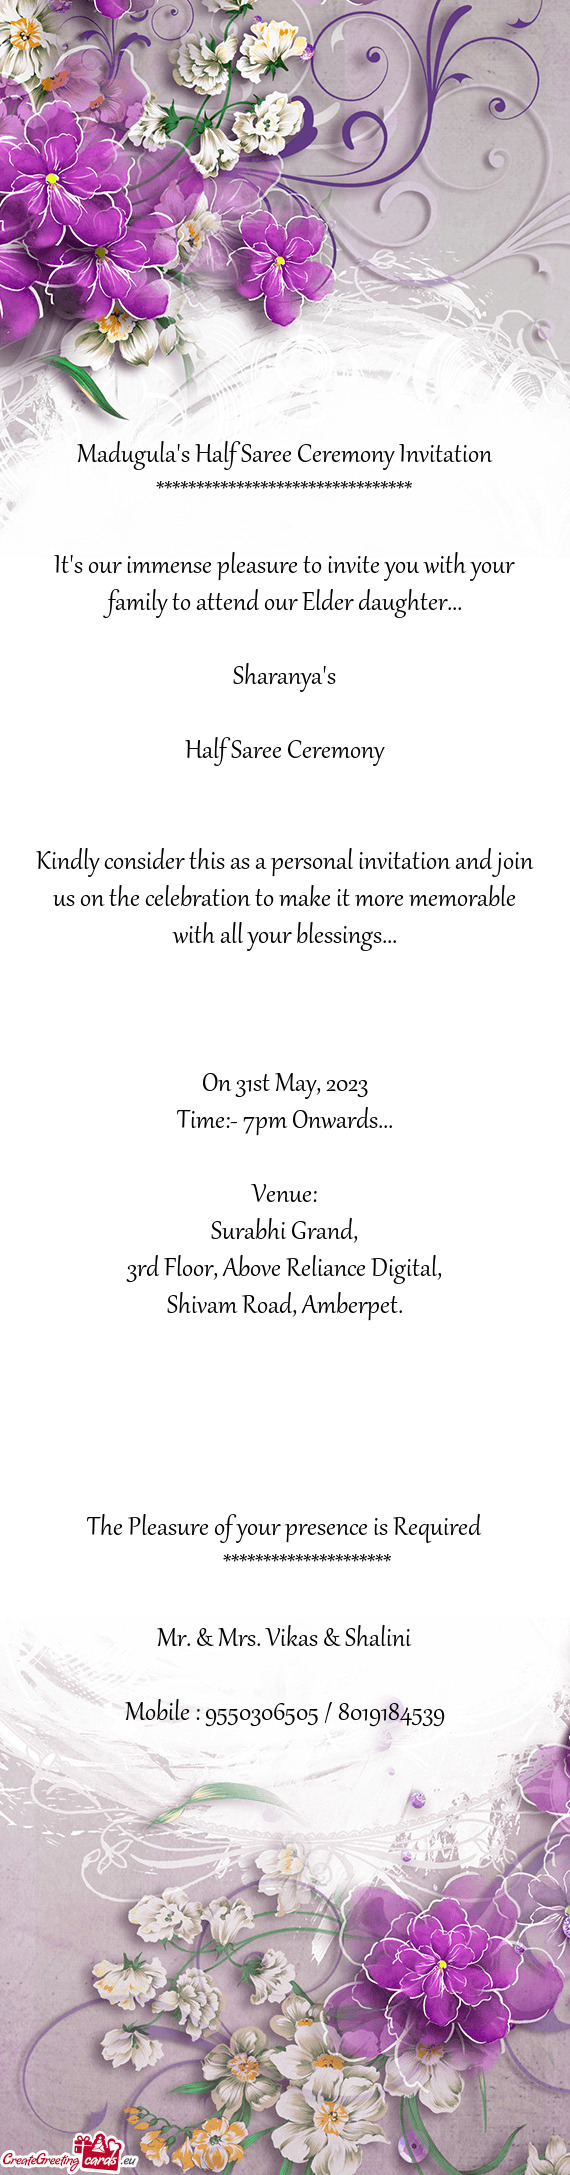 Kindly consider this as a personal invitation and join us on the celebration to make it more memorab